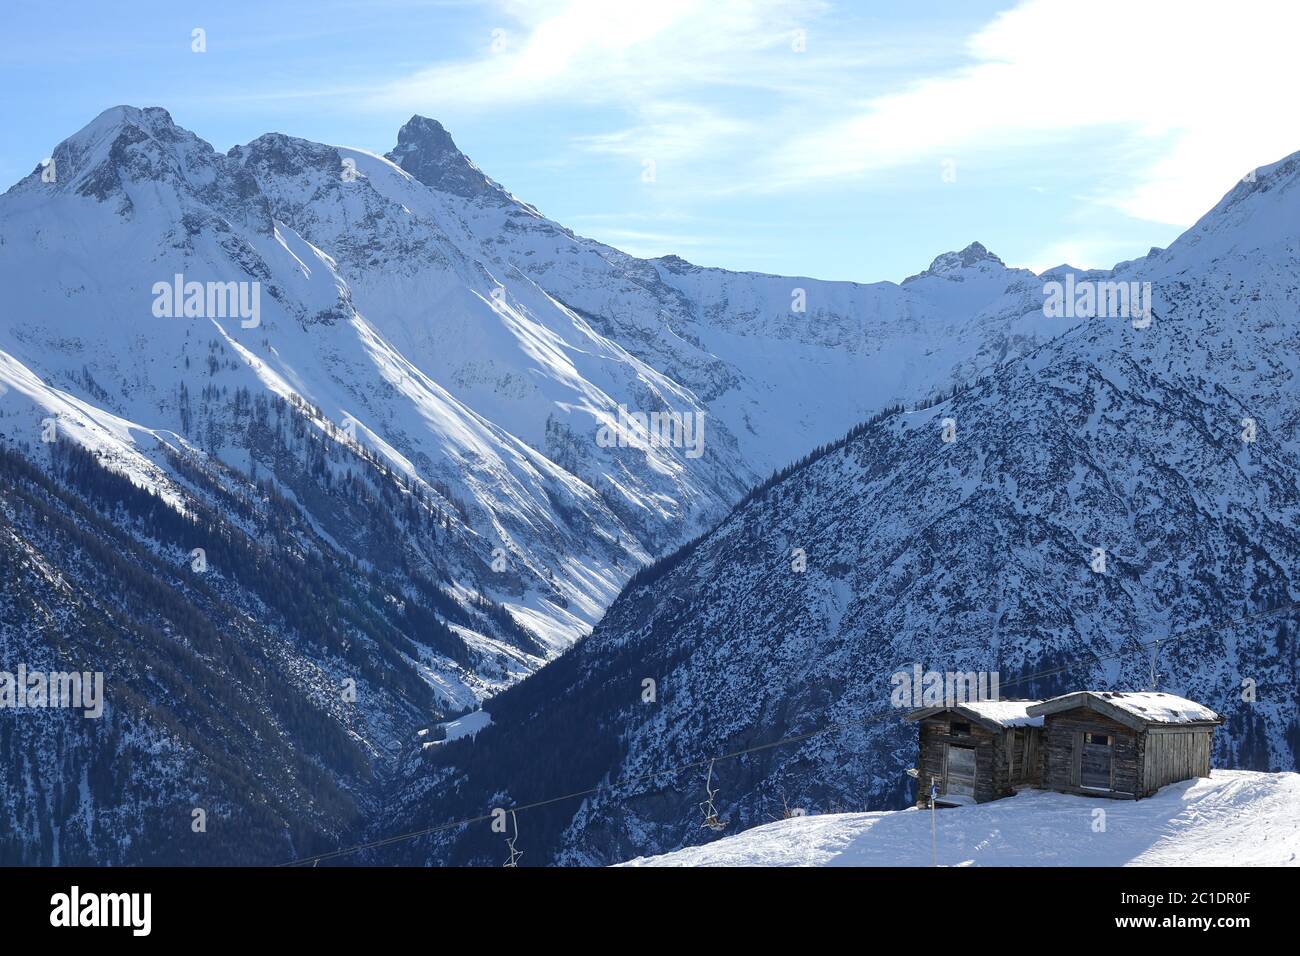 Chairlift at two wooden huts near the snow-capped mountains in Tyrol. Stock Photo